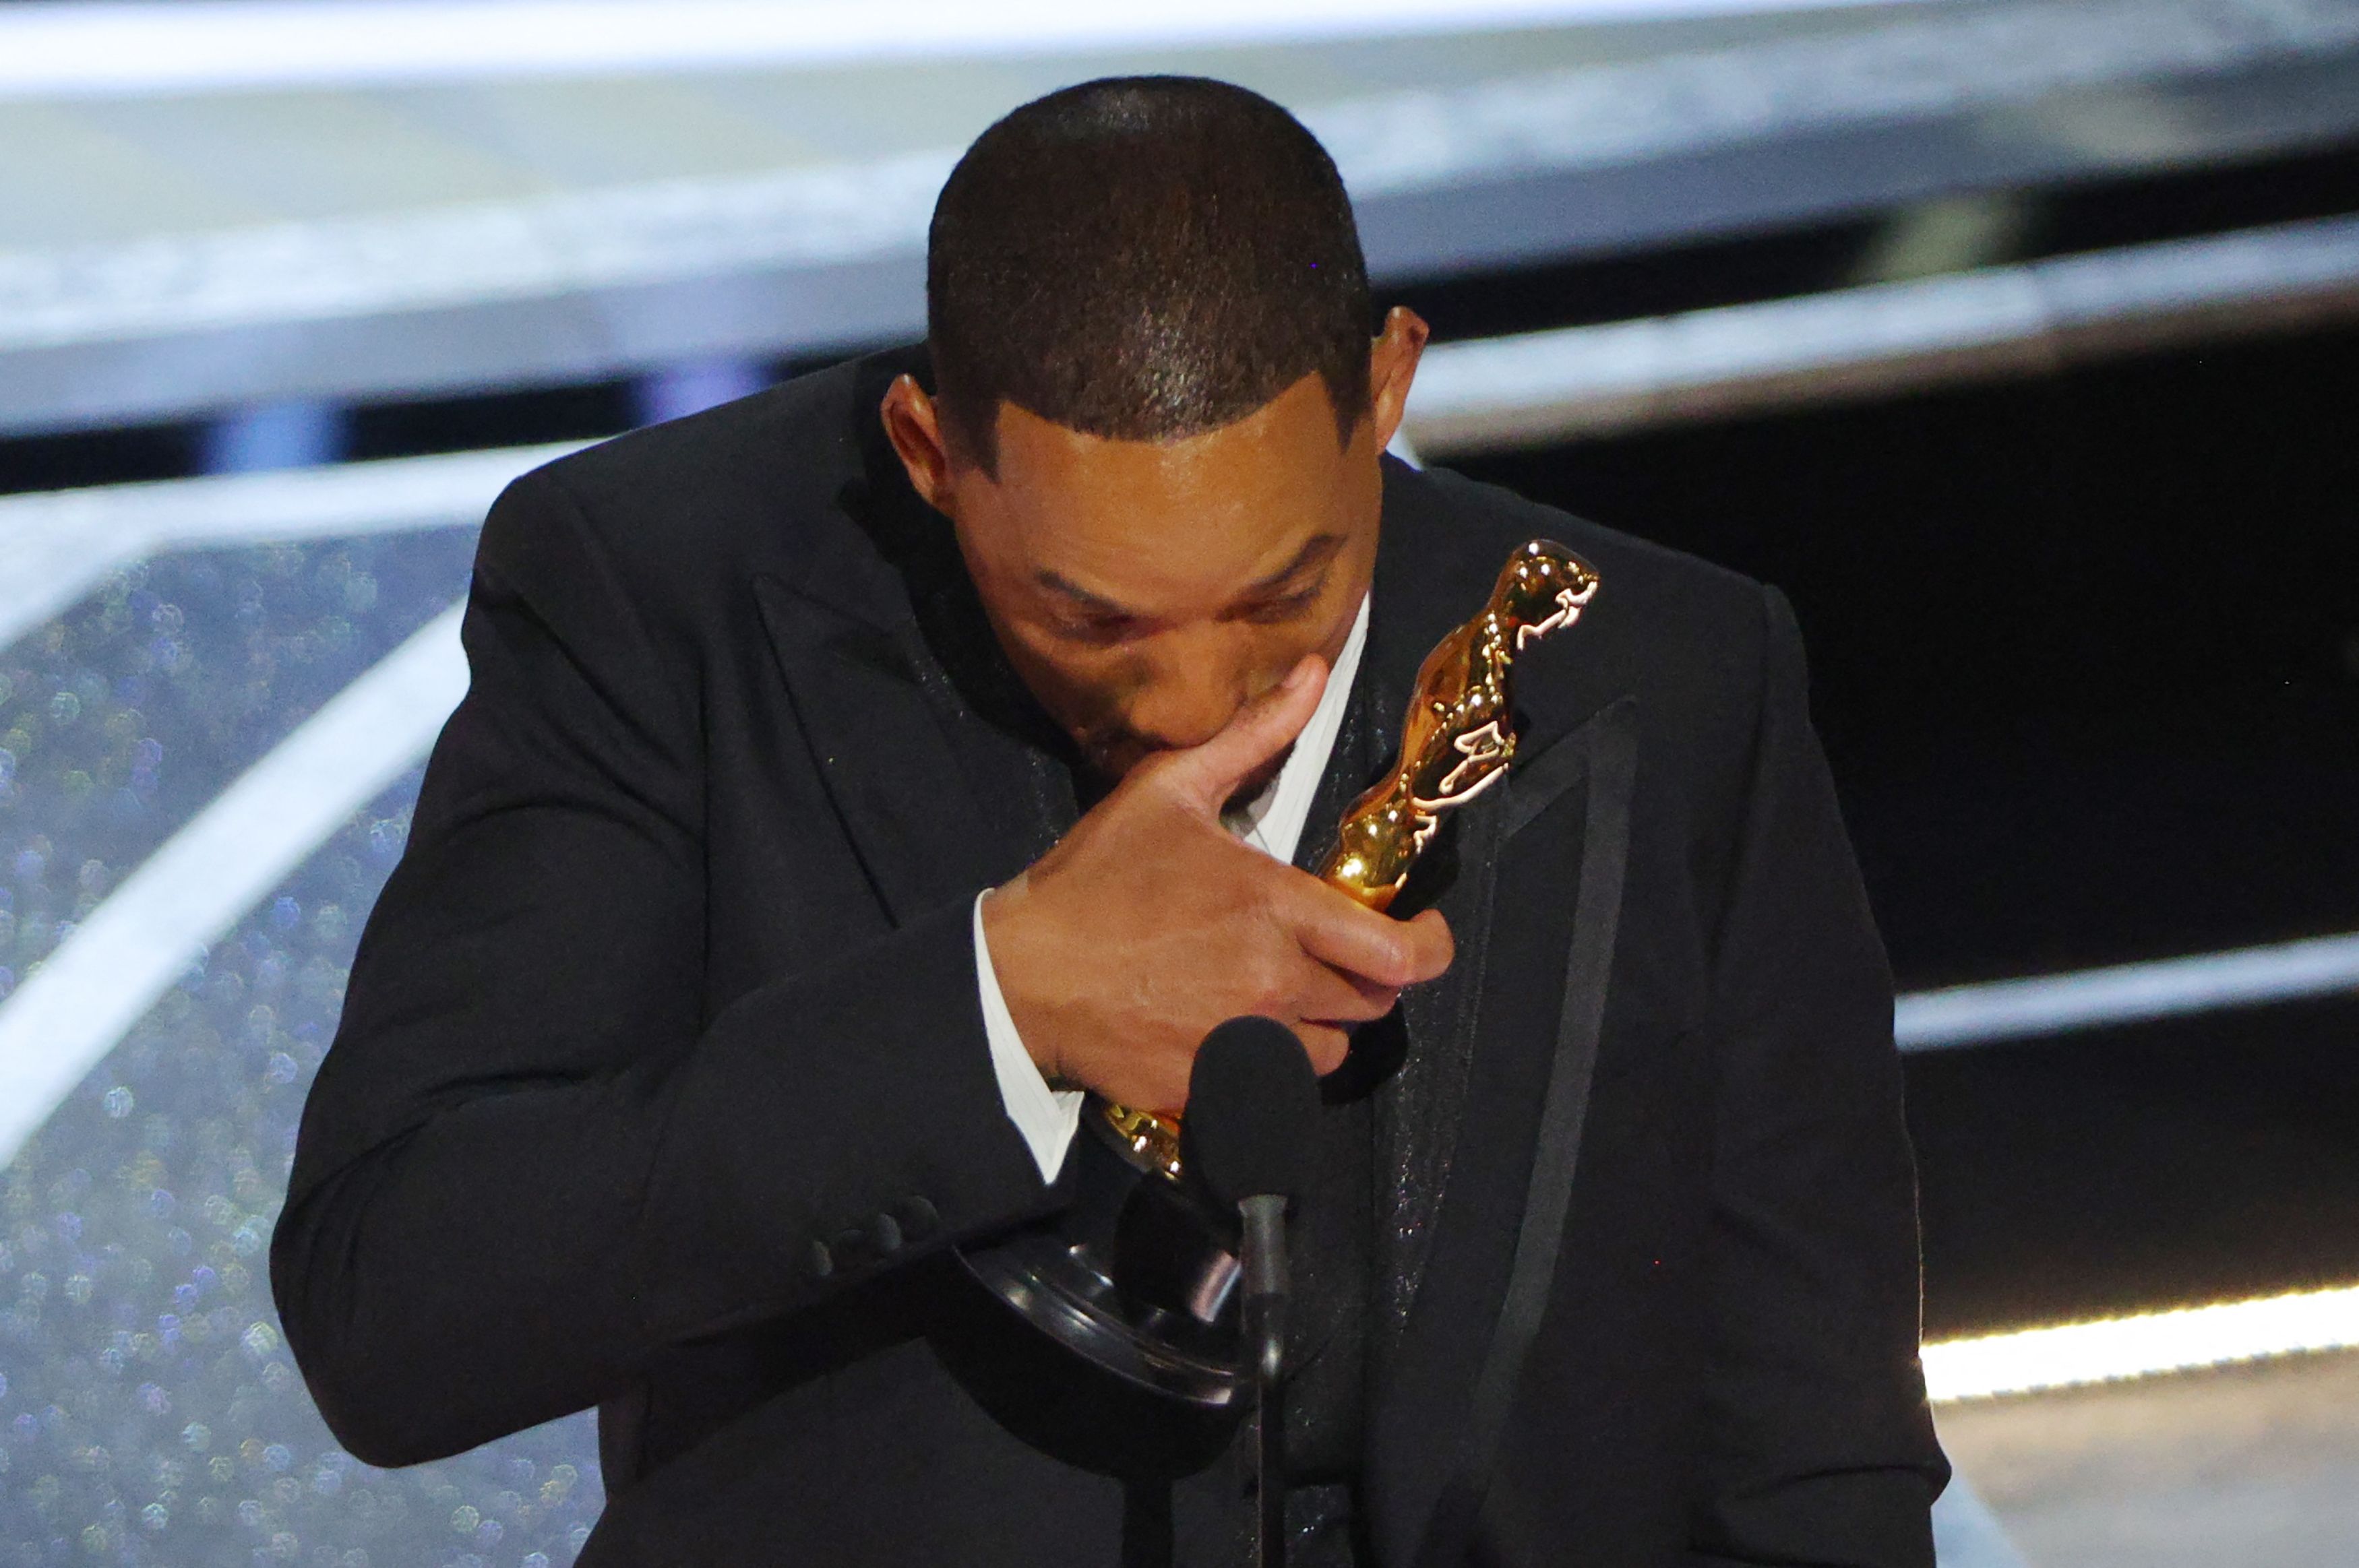 Will Smith accepts the Oscar for Best Actor in "King Richard" at the 94th Academy Awards in Hollywood, Los Angeles, California, U.S., March 27, 2022. REUTERS/Brian Snyder